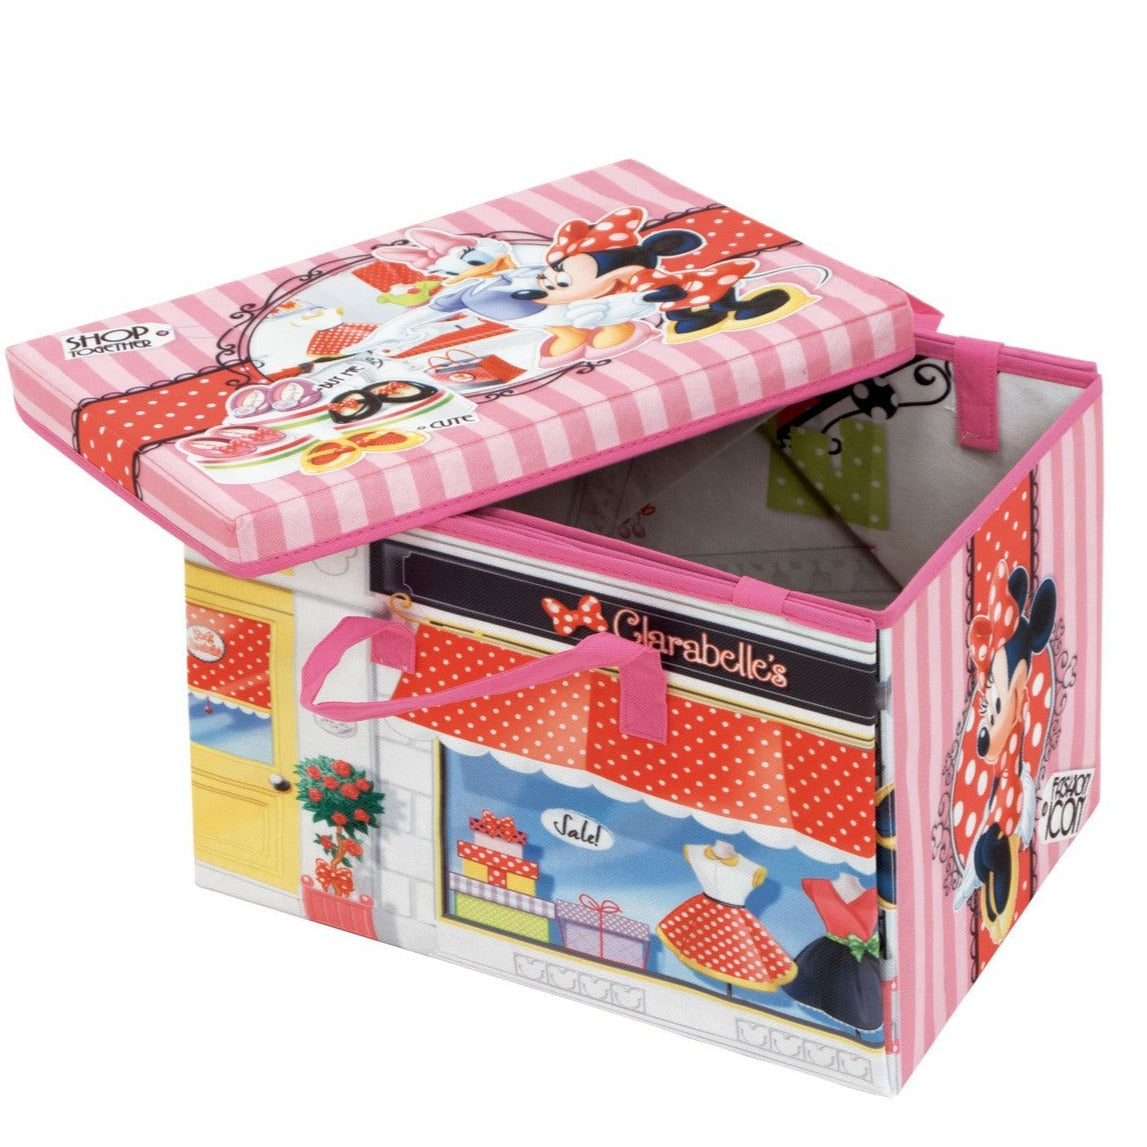 Minnie Mouse Fabric Storage Box With Playmat